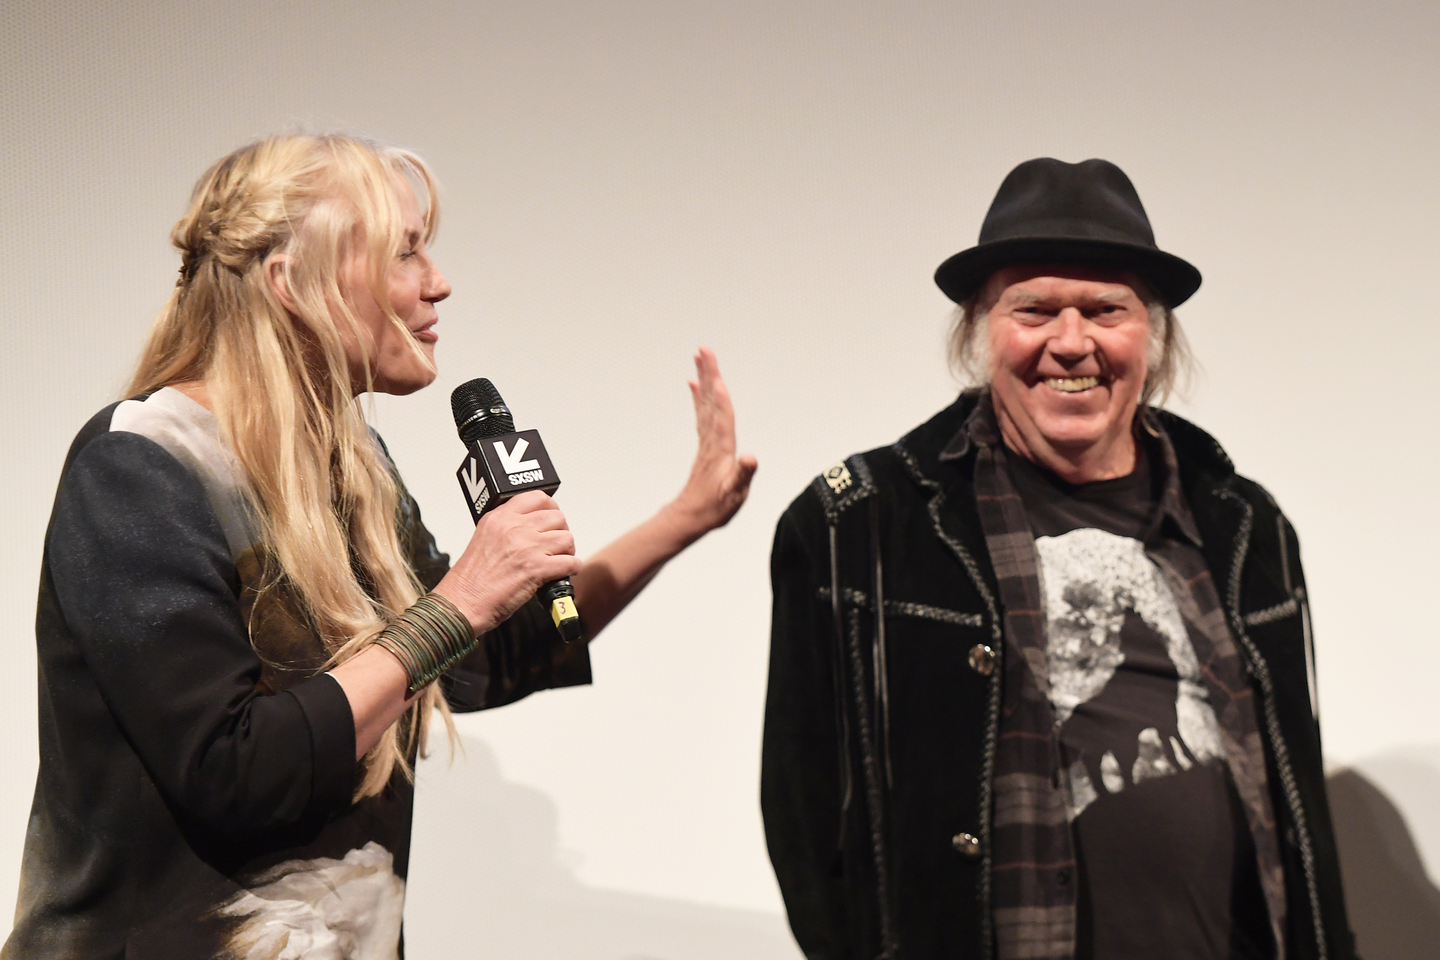 Director Daryl Hannah and Neil Young at the PARADOX world premiere at the Paramount Theatre. Photo by Matt Winkelmeyer/Getty Images for SXSW